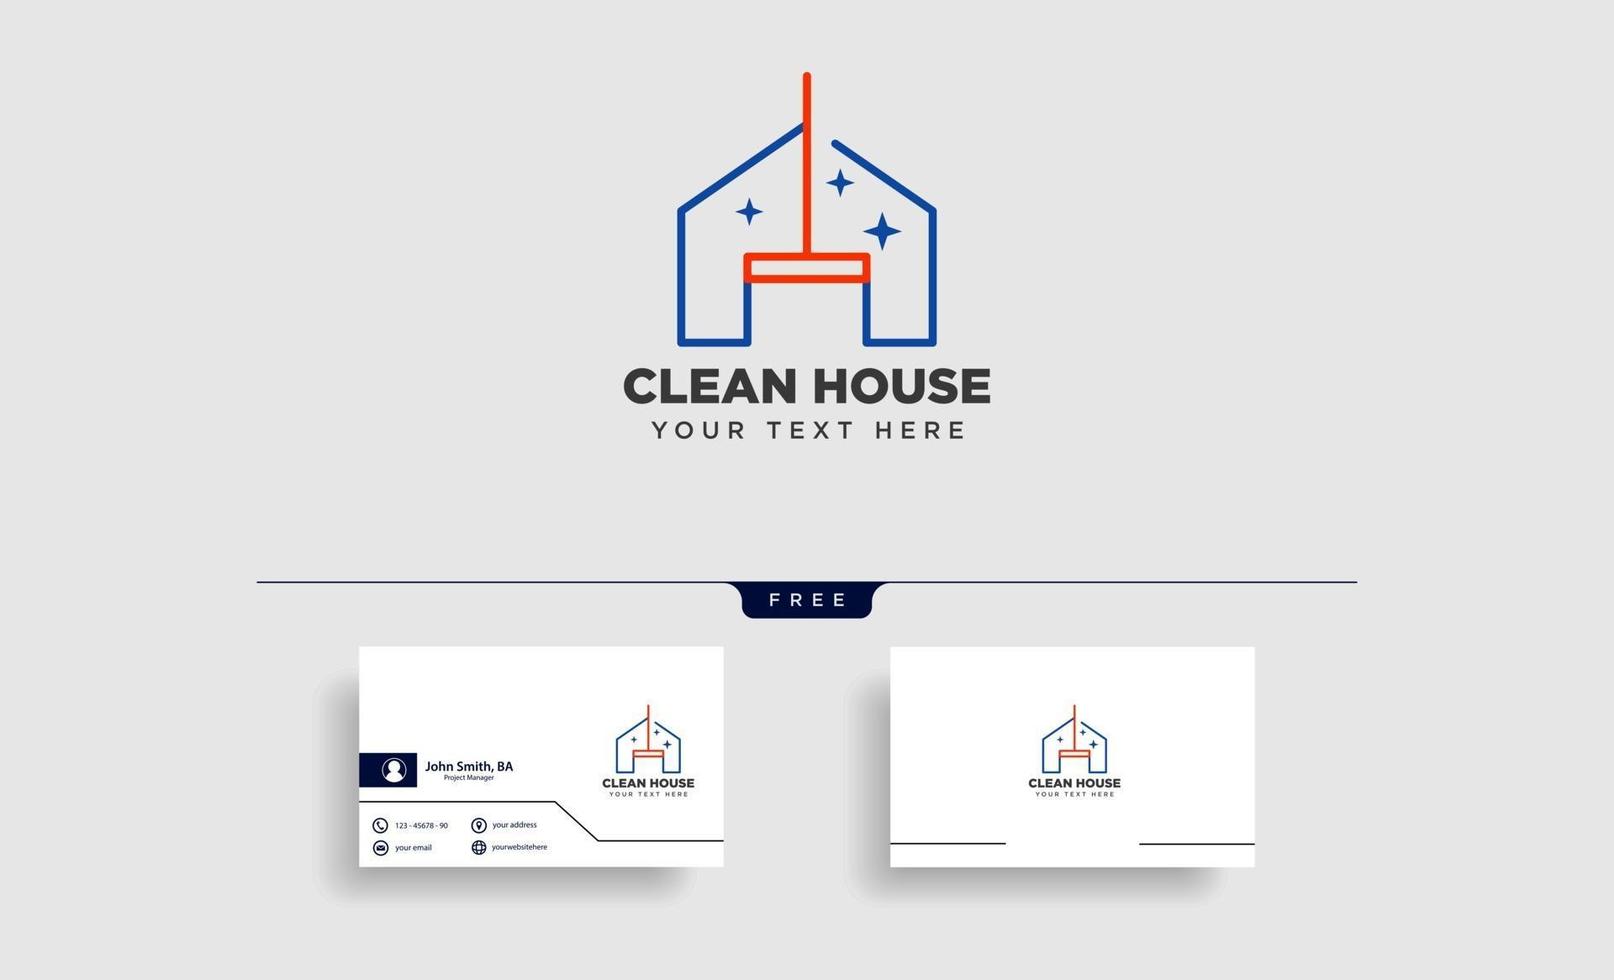 cleaning service house eco logo template vector illustration icon element isolated vector